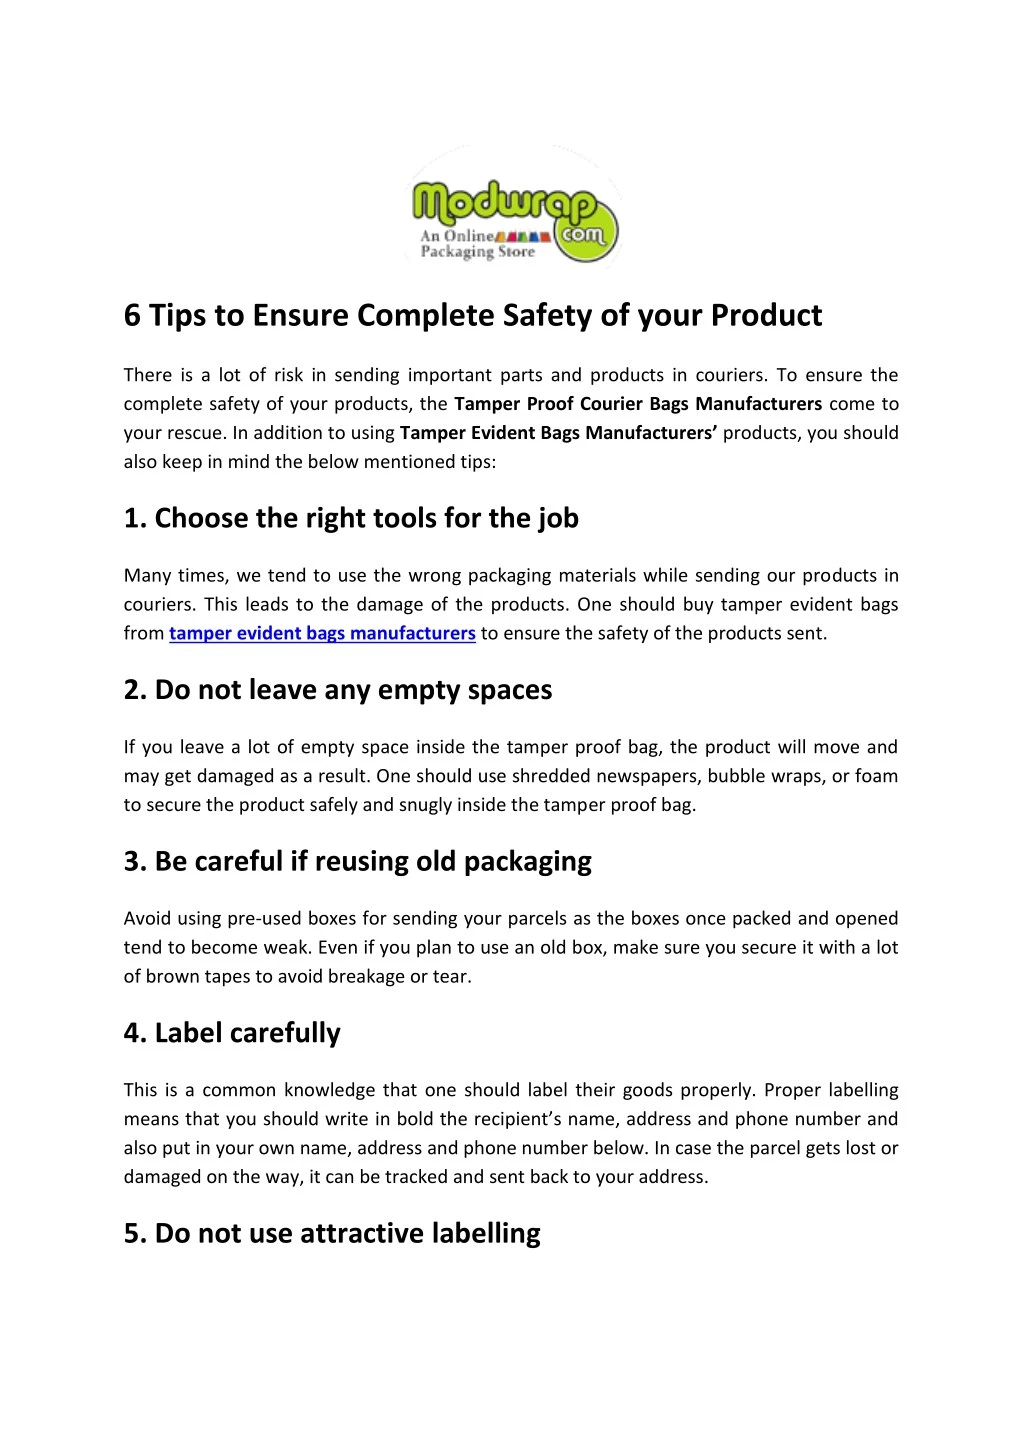 6 tips to ensure complete safety of your product